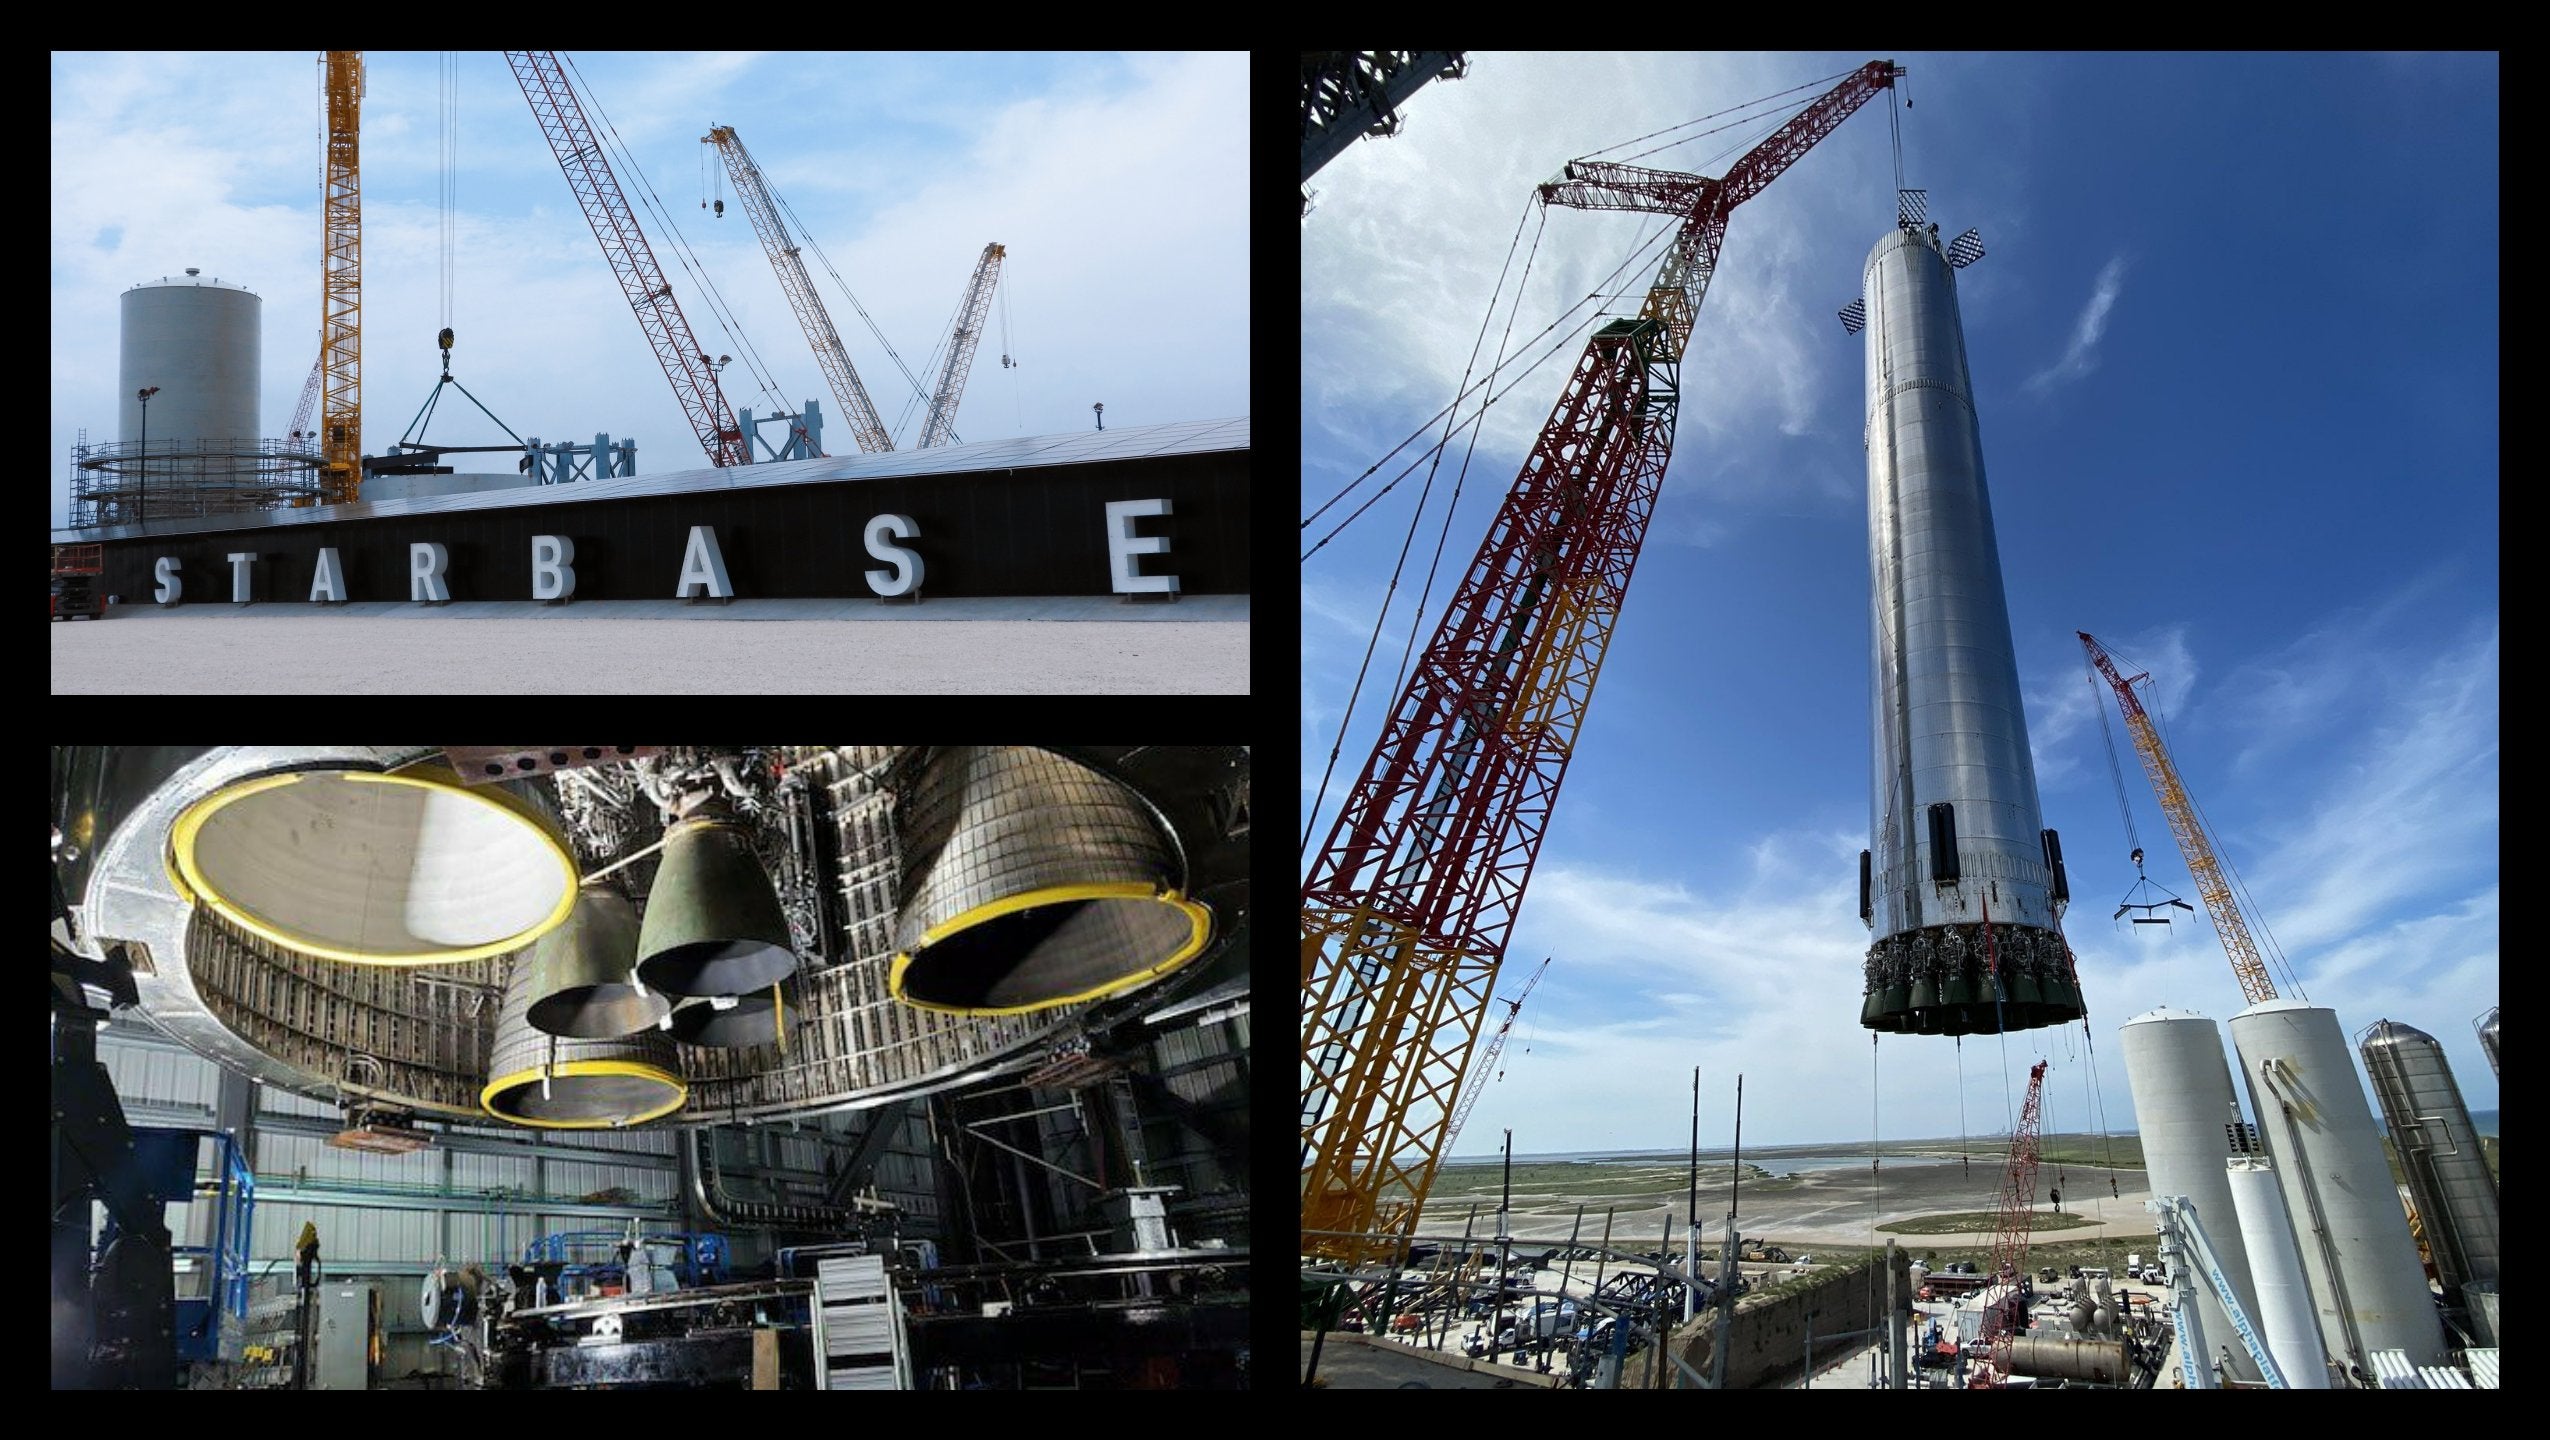 Excitement Builds Leading Up To SpaceX’s Starship Debut Orbital Flight!